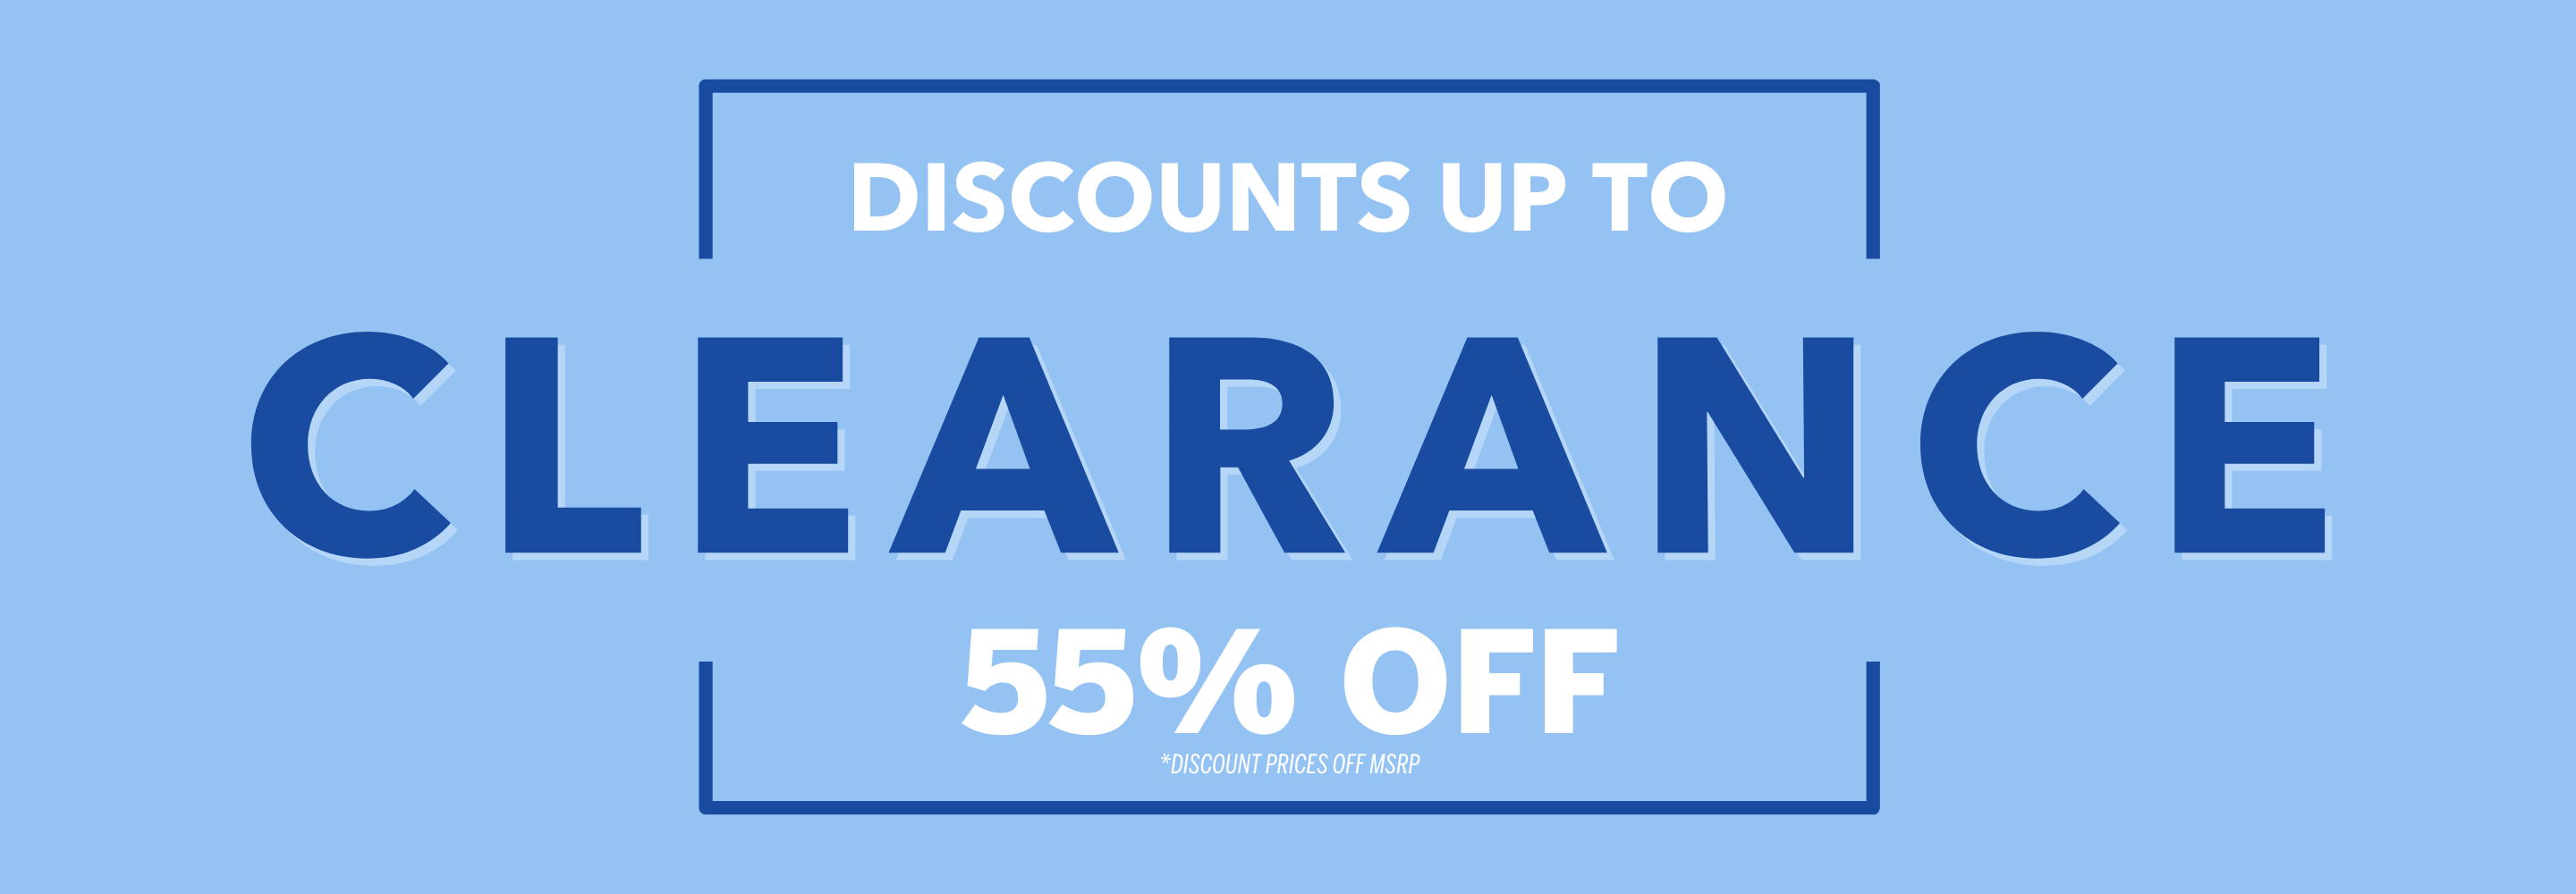 Clearance: Discounts up to 55% off